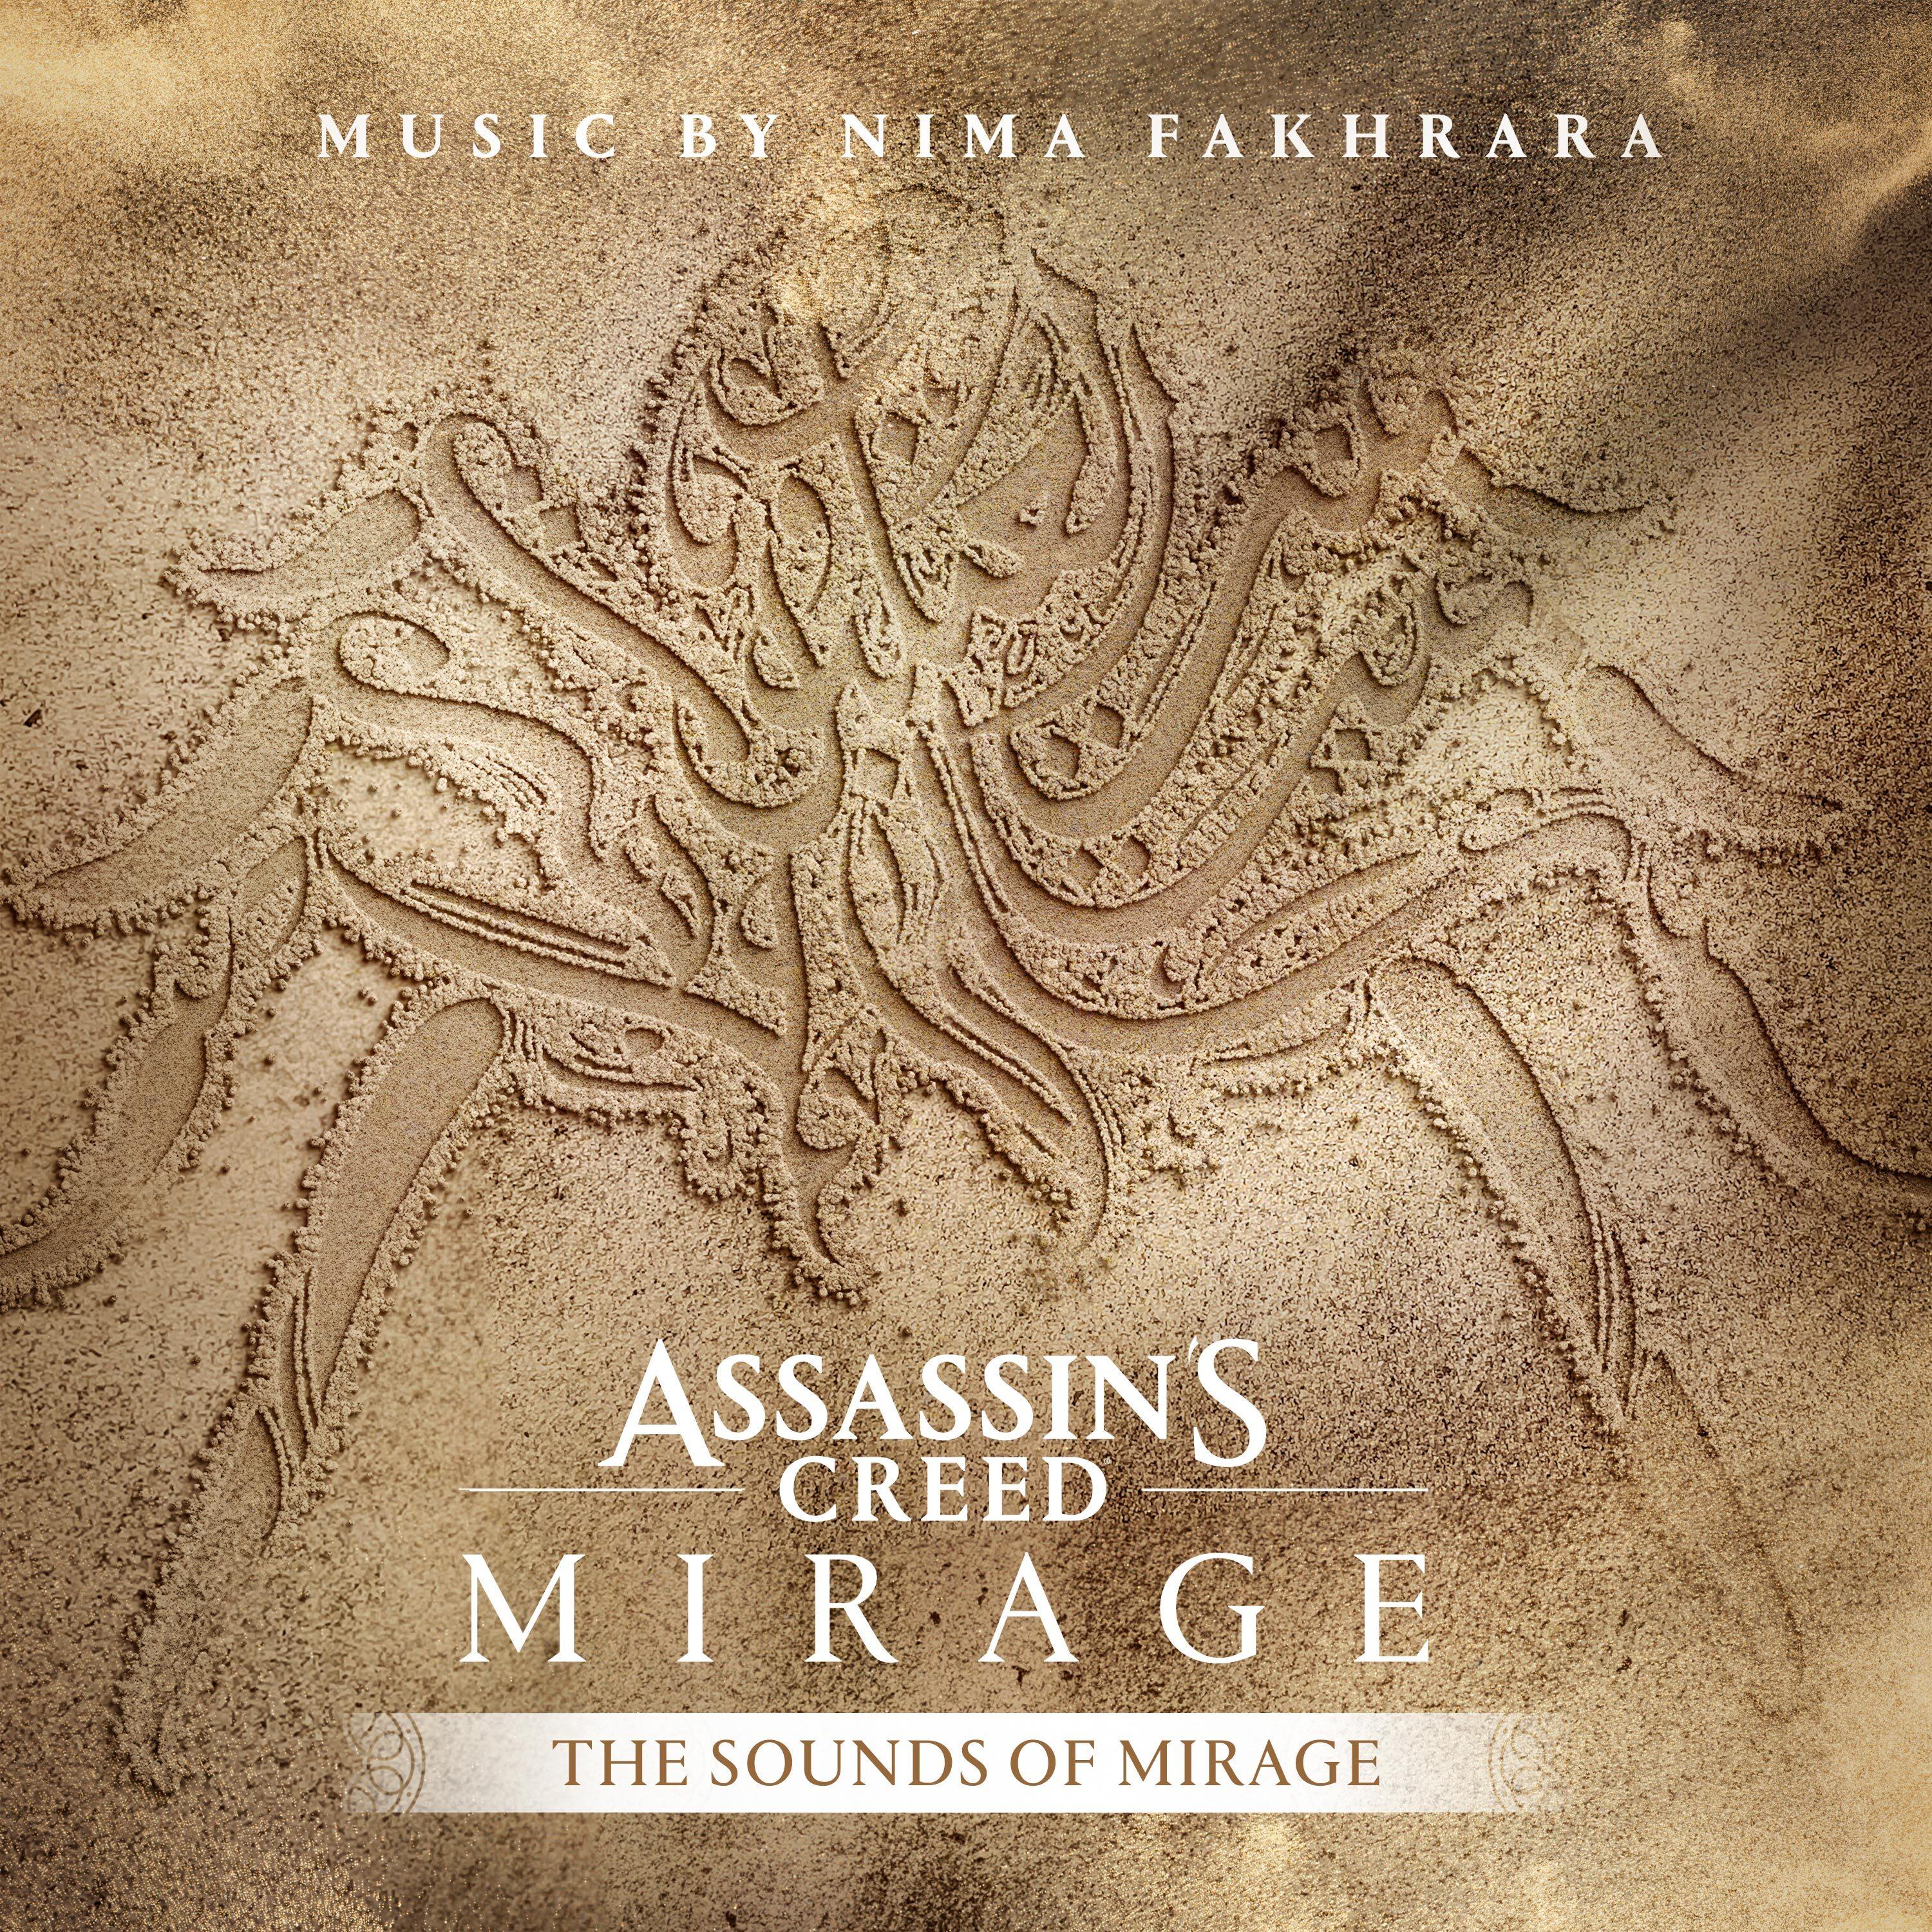 Assassin's Creed Mirage: The Sounds of Mirage